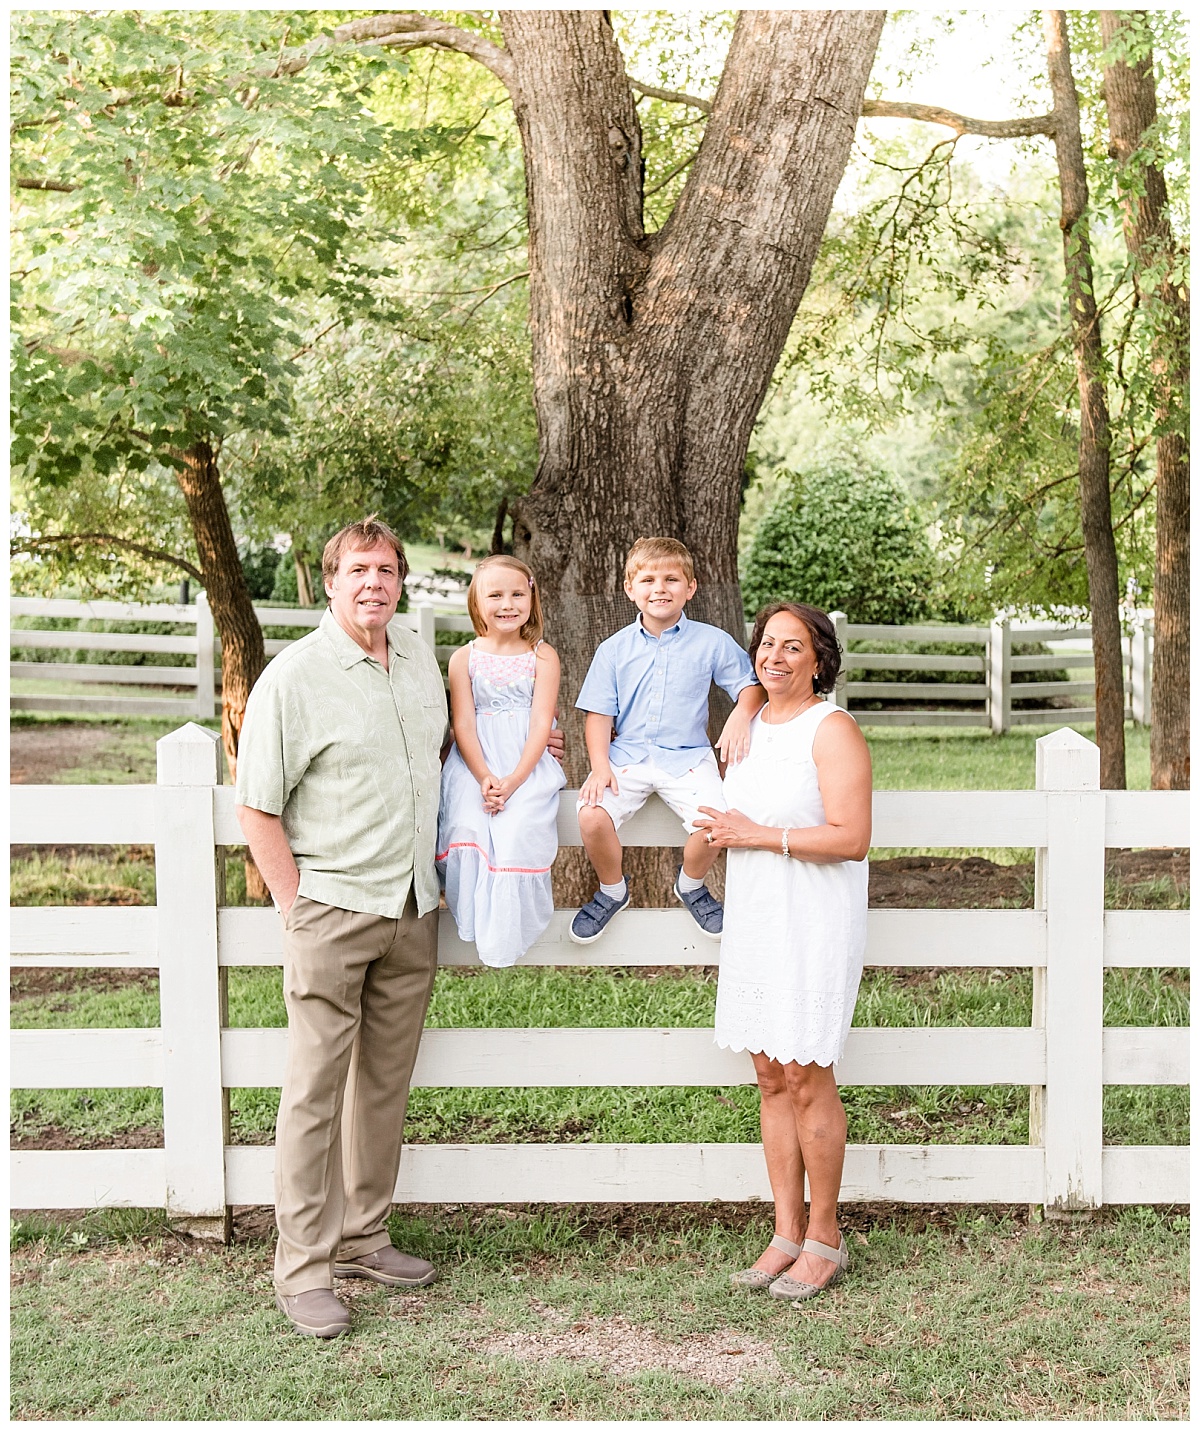 Raleigh Family Photography
Historic Oak View Family Photography
Light and airy Raleigh family photography